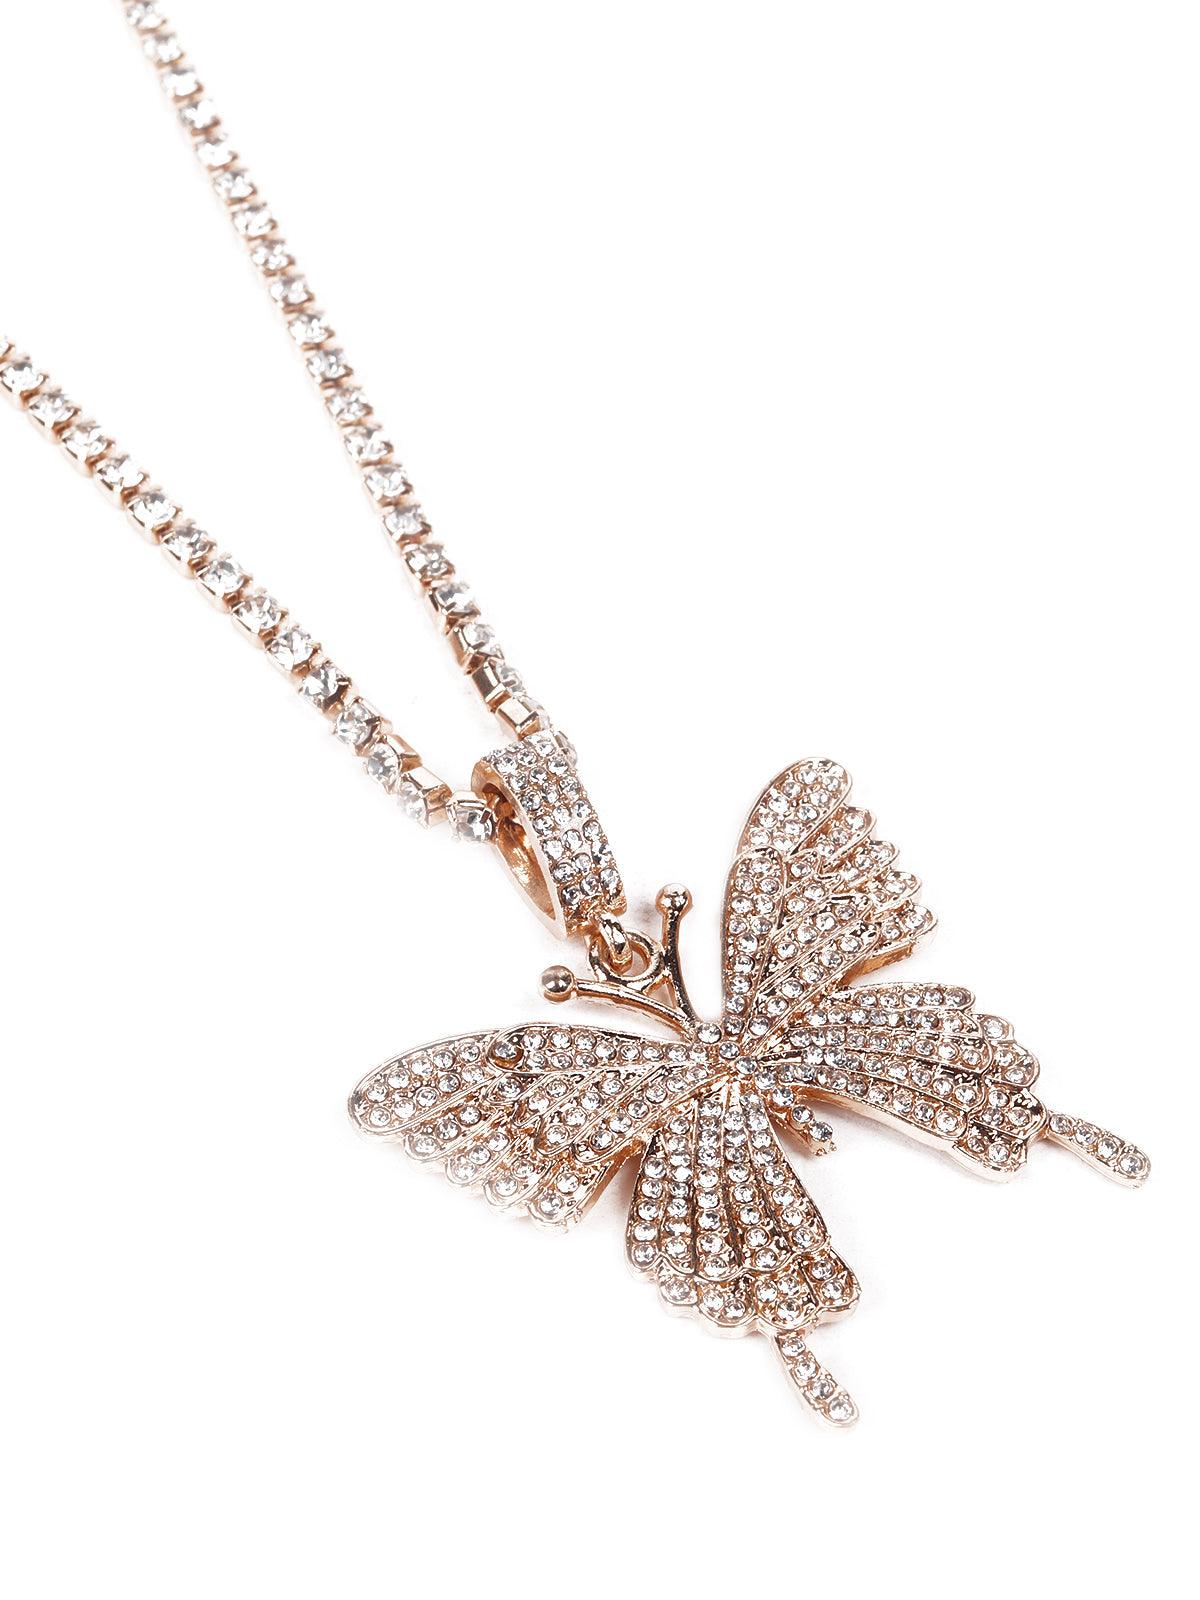 Two pieces designer butterfly necklace - Odette